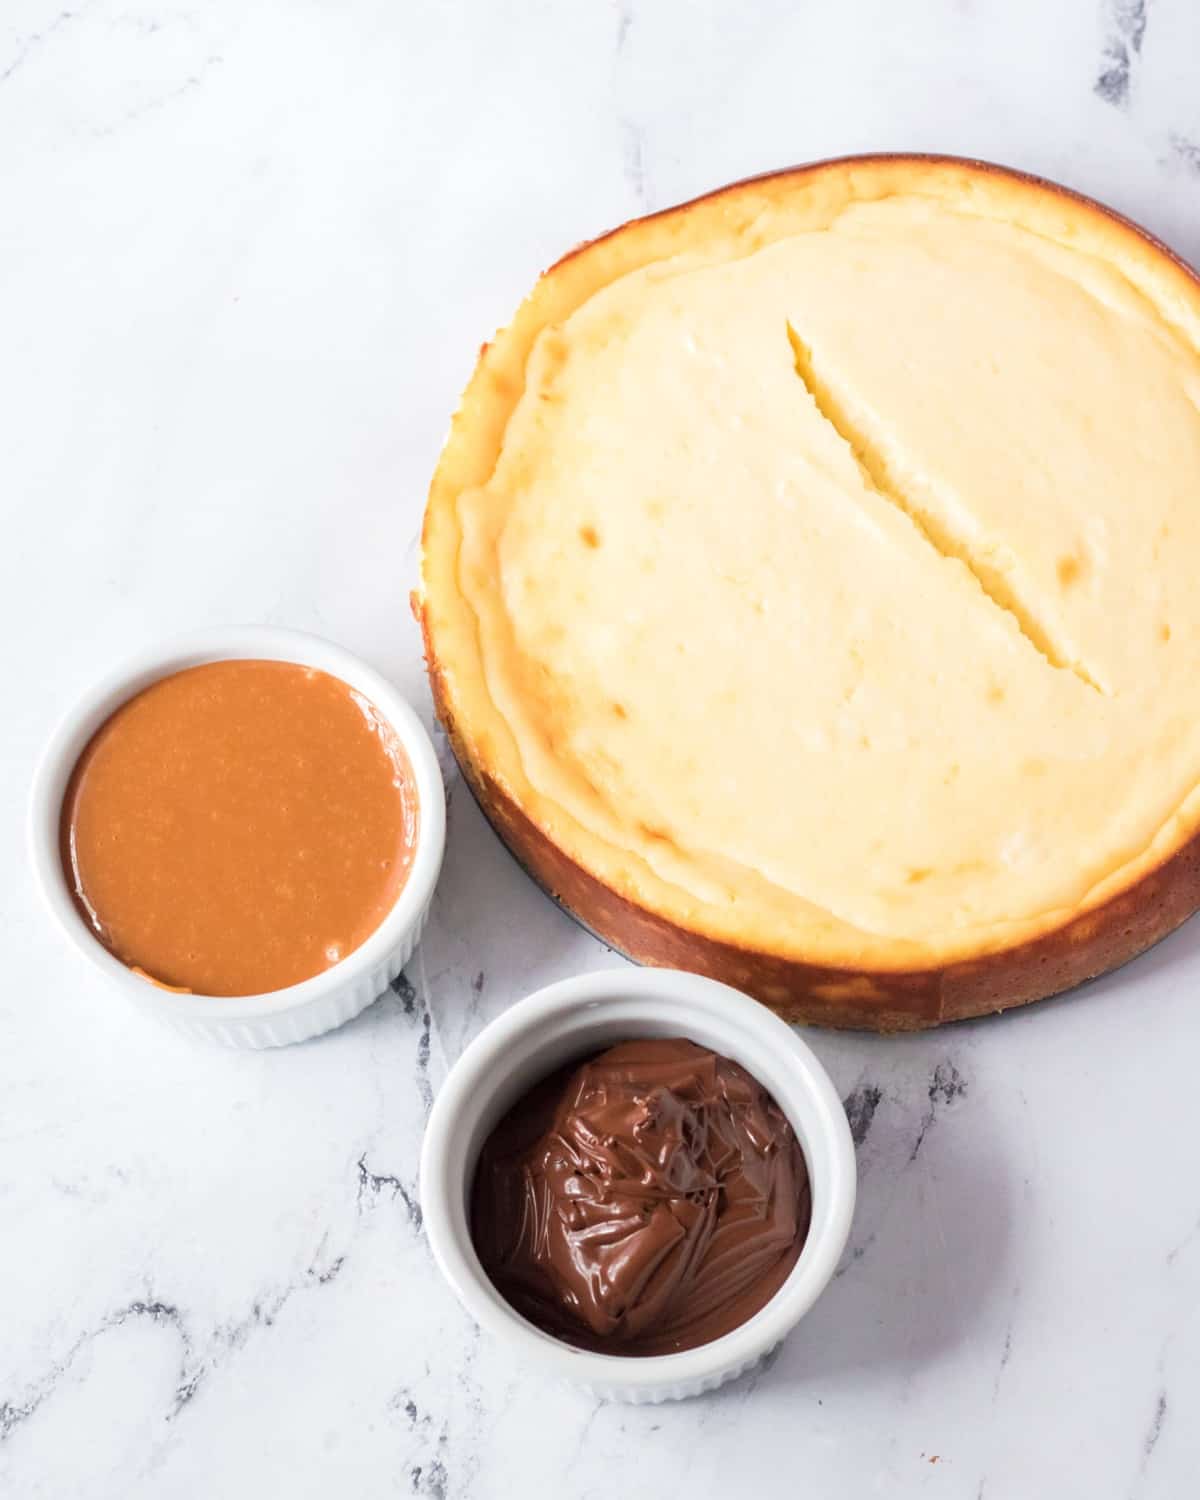 A baked cheesecake with two bowls of caramel and chocolate.